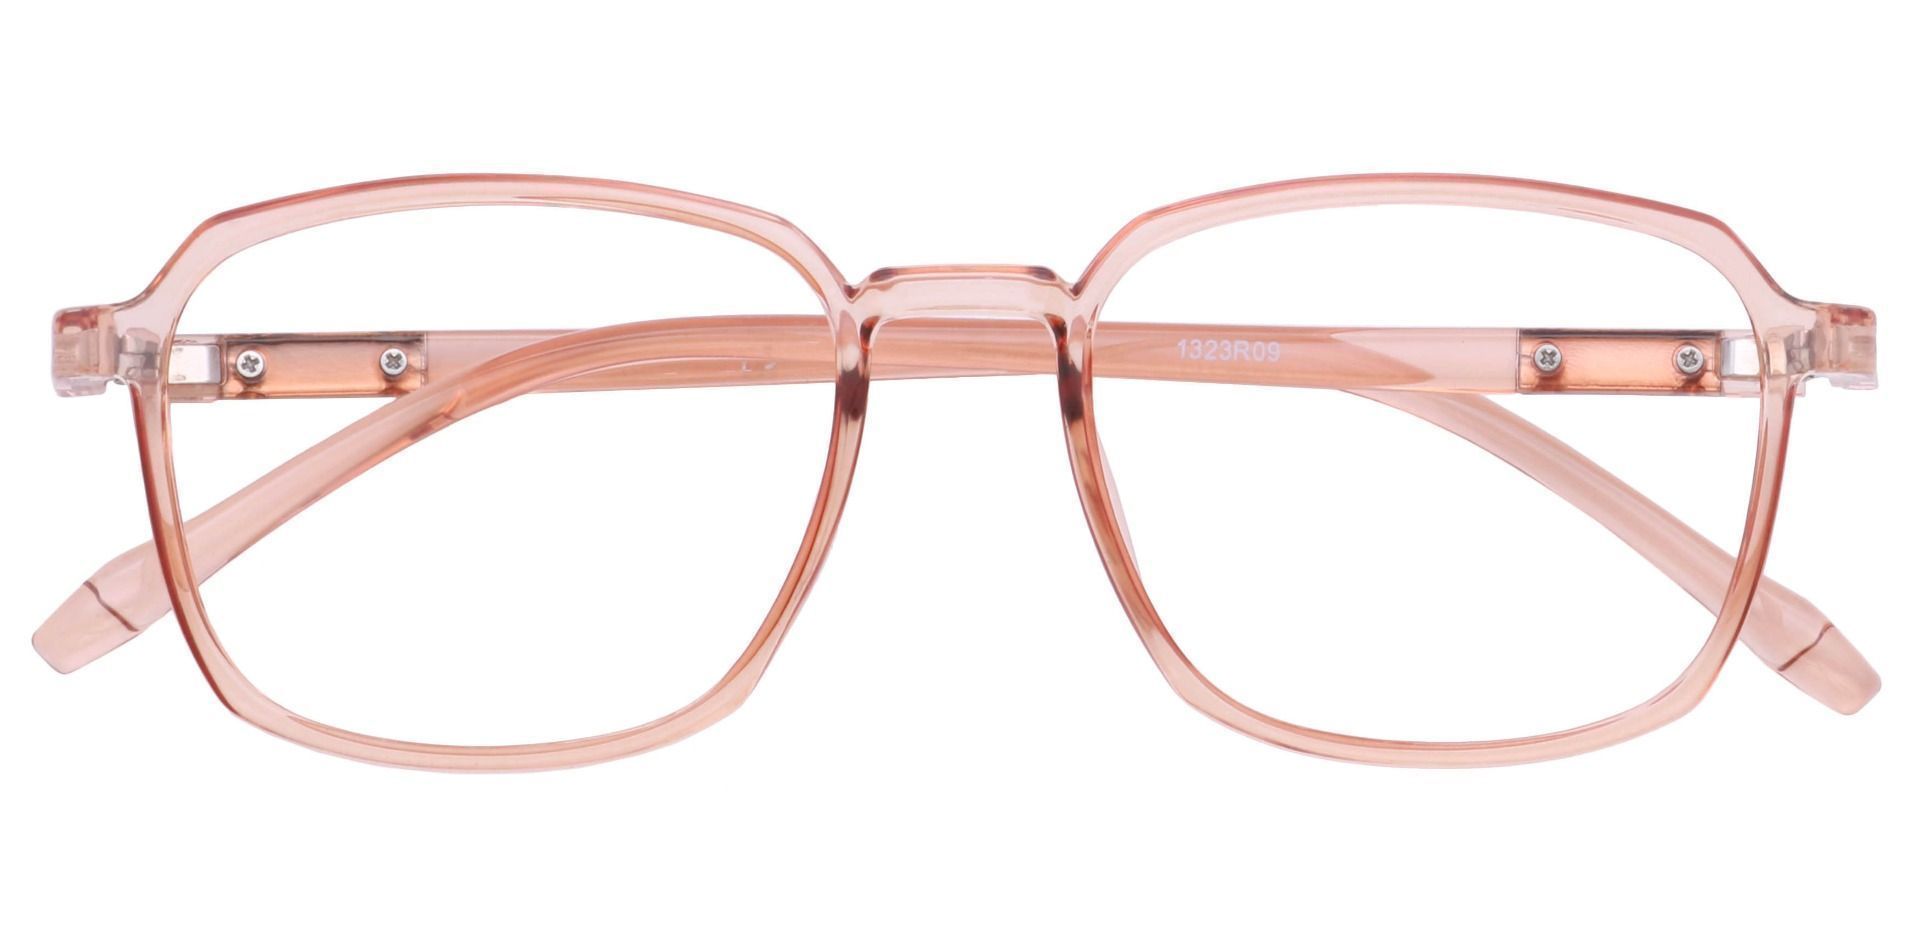 Stella Square Eyeglasses Frame - The Frame Is Red And Clear